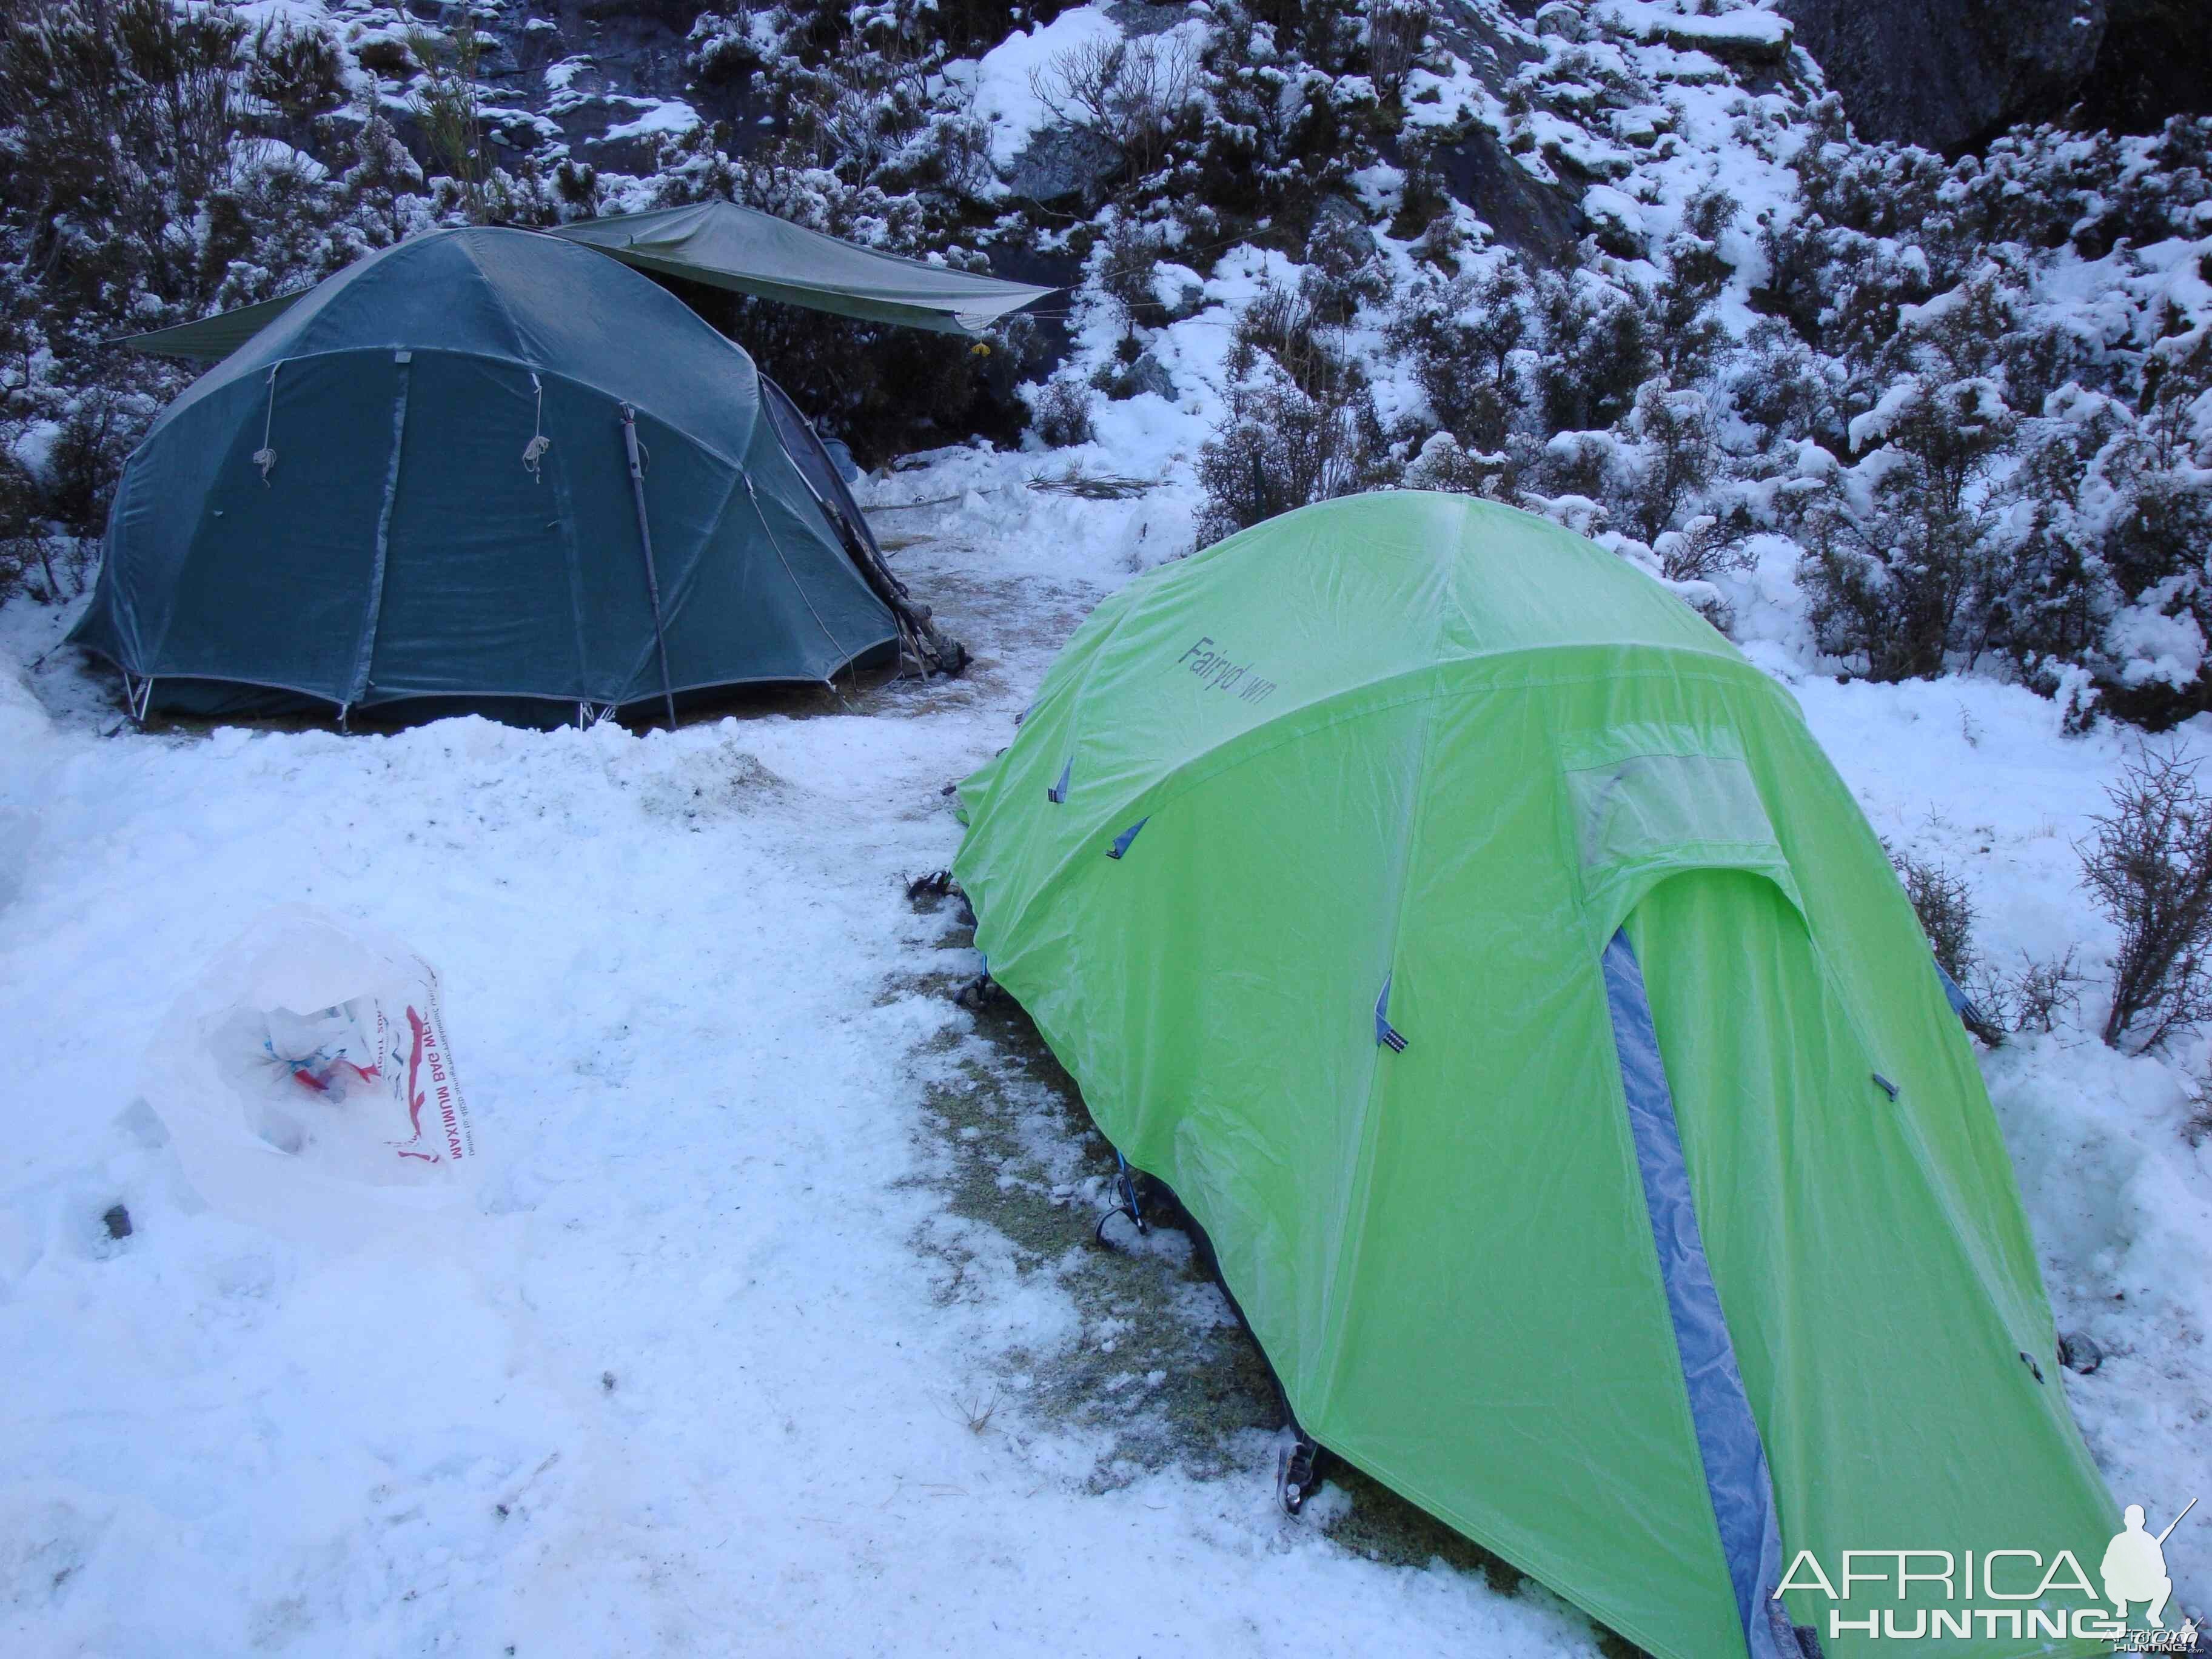 Very cold camp